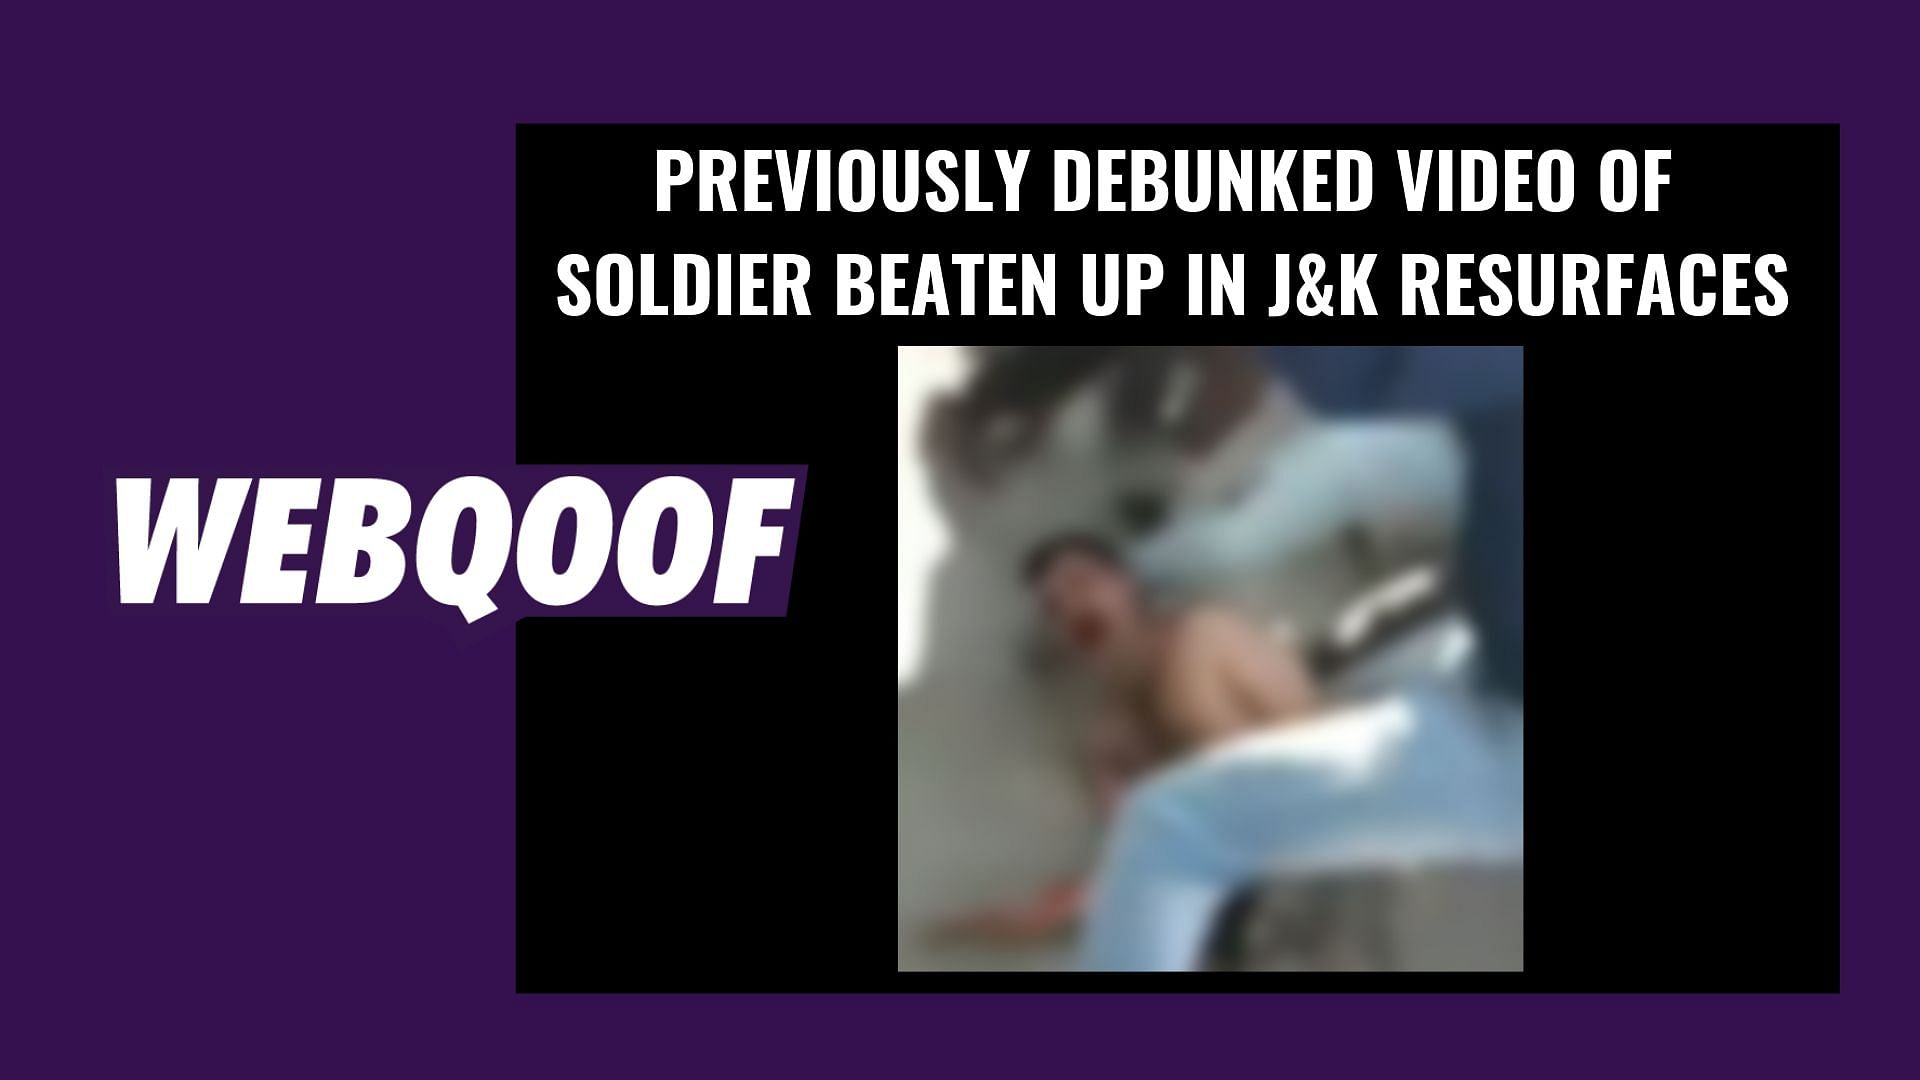 The video is of an incident from 2017, and the soldier was not beaten to death as claimed, but severely injured.